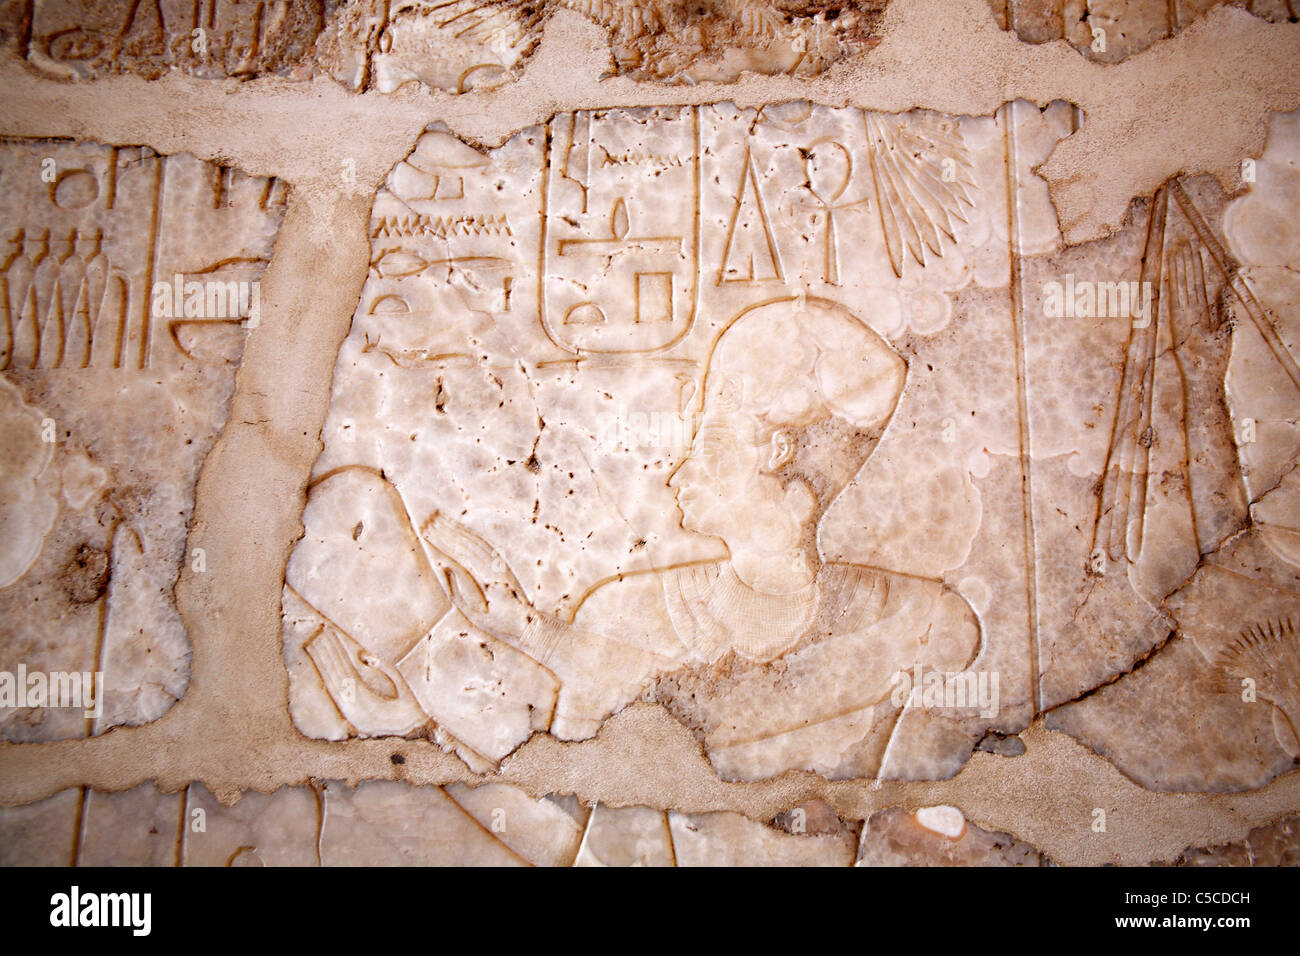 Relief of the Alabaster chapel of Amenhotep I (c.1505 BC), Luxor, Egypt Stock Photo